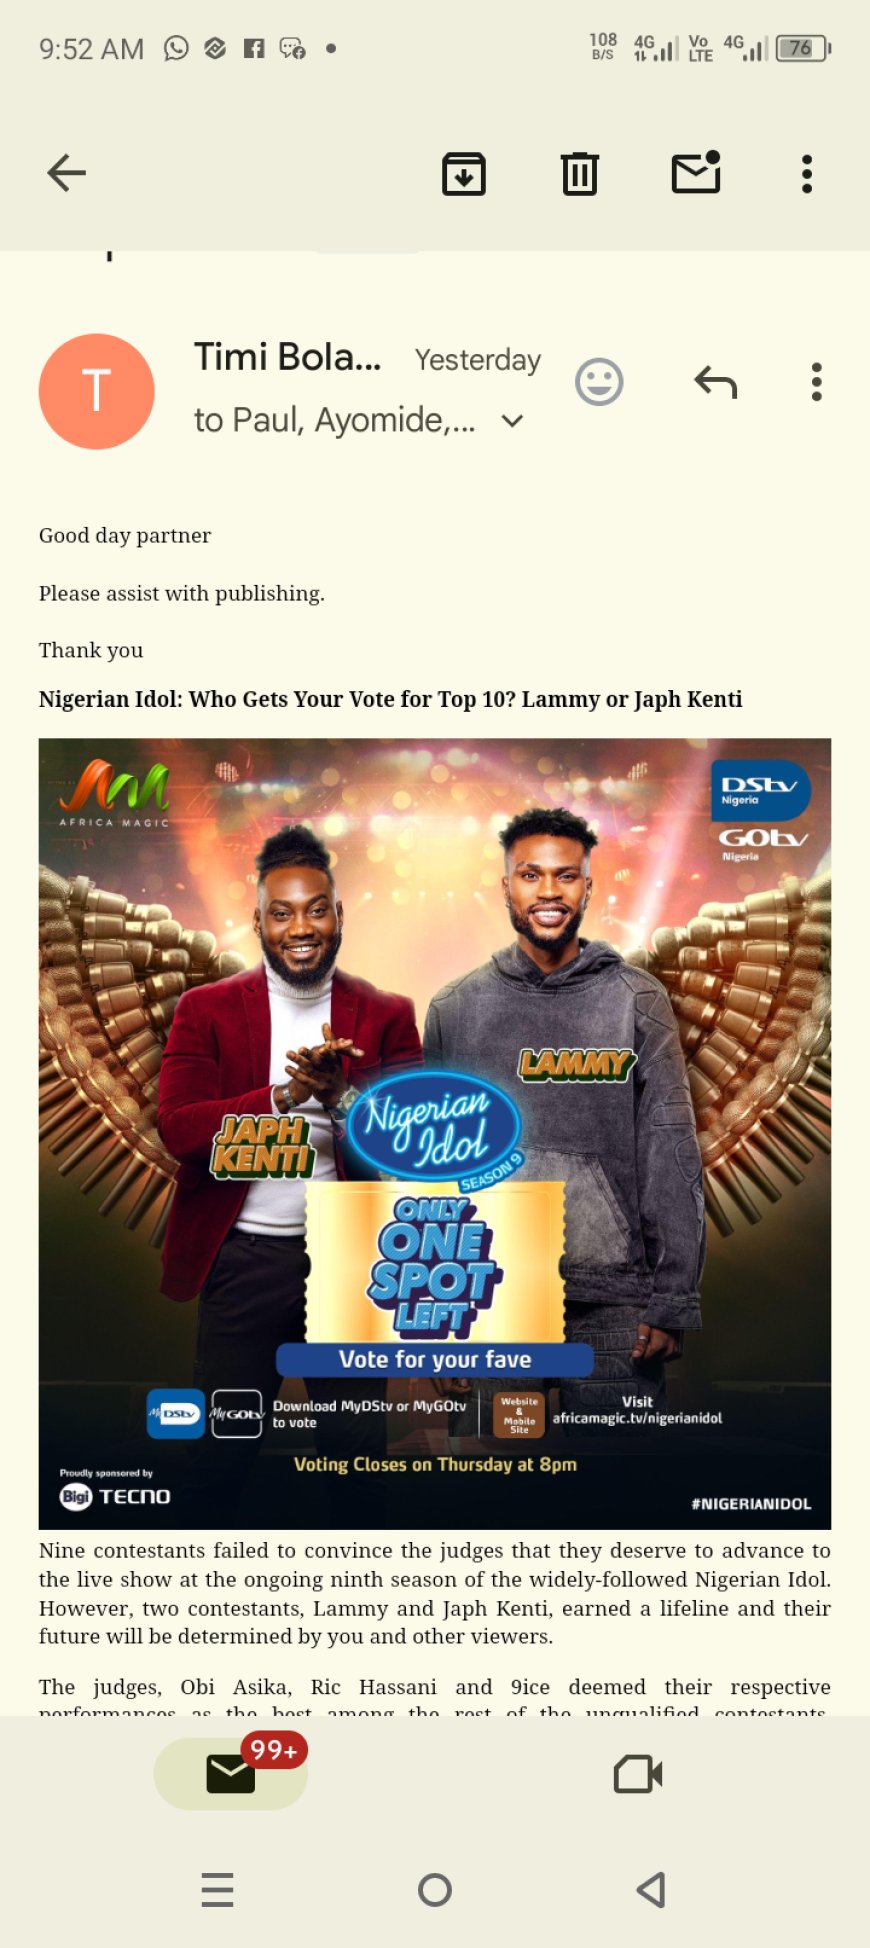 Nigerian Idol: Who Gets Your Vote for Top 10? Lammy or Japh Kenti